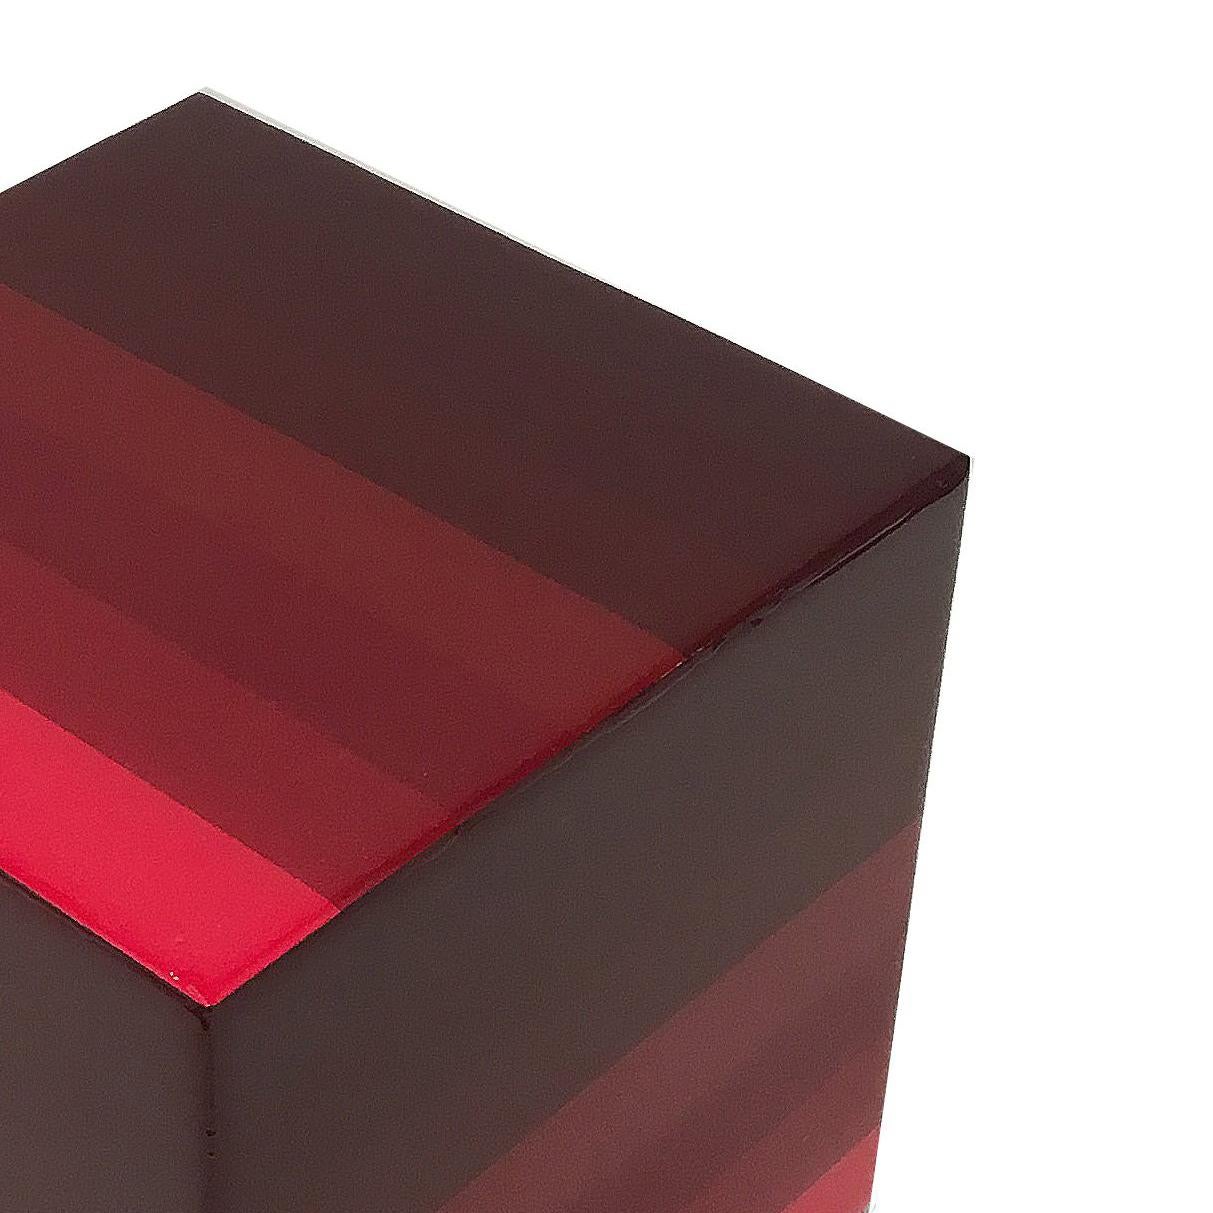 Red Cube - Brown Abstract Sculpture by Heidi Spector